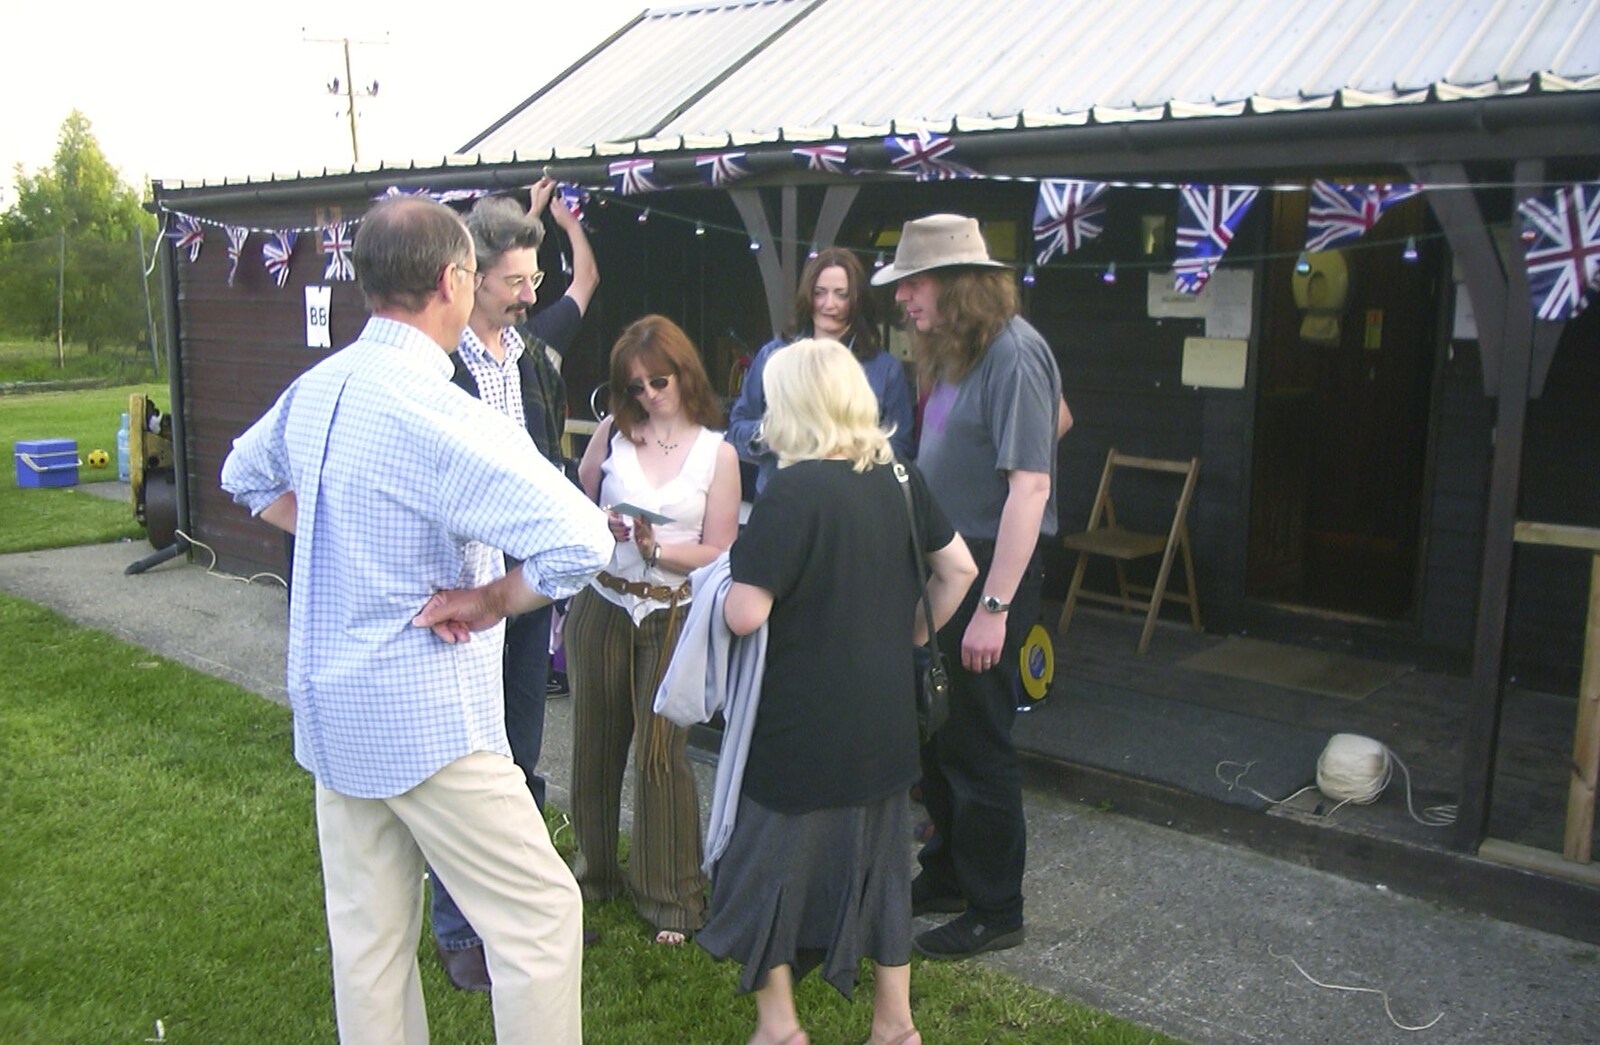 The band's groupies appear from The BBs at BOCM Pauls Pavillion, Burston, Norfolk - 20th May 2003